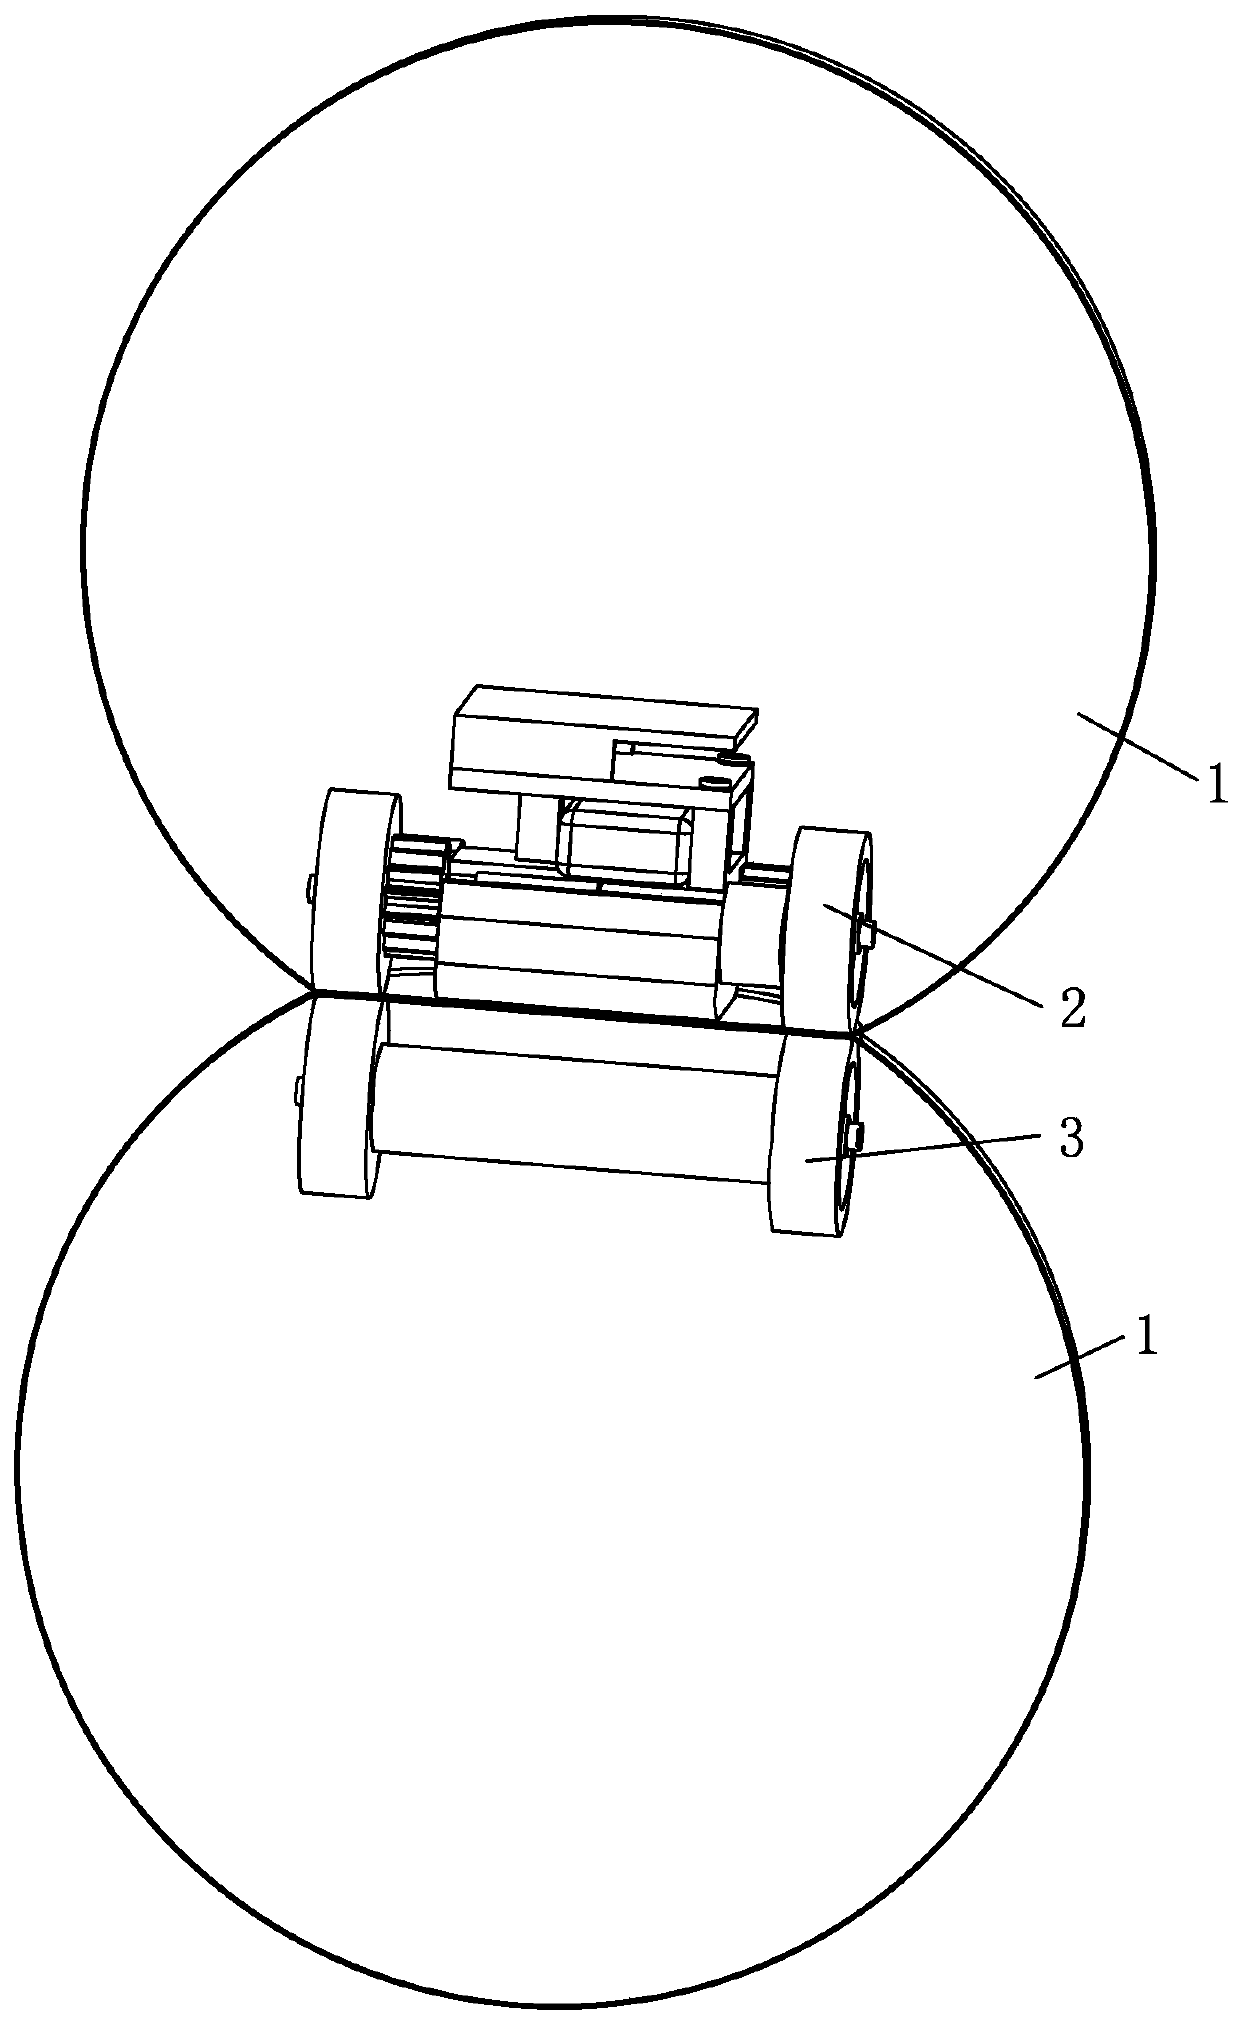 Modular spherical soft robot using magnetic connections